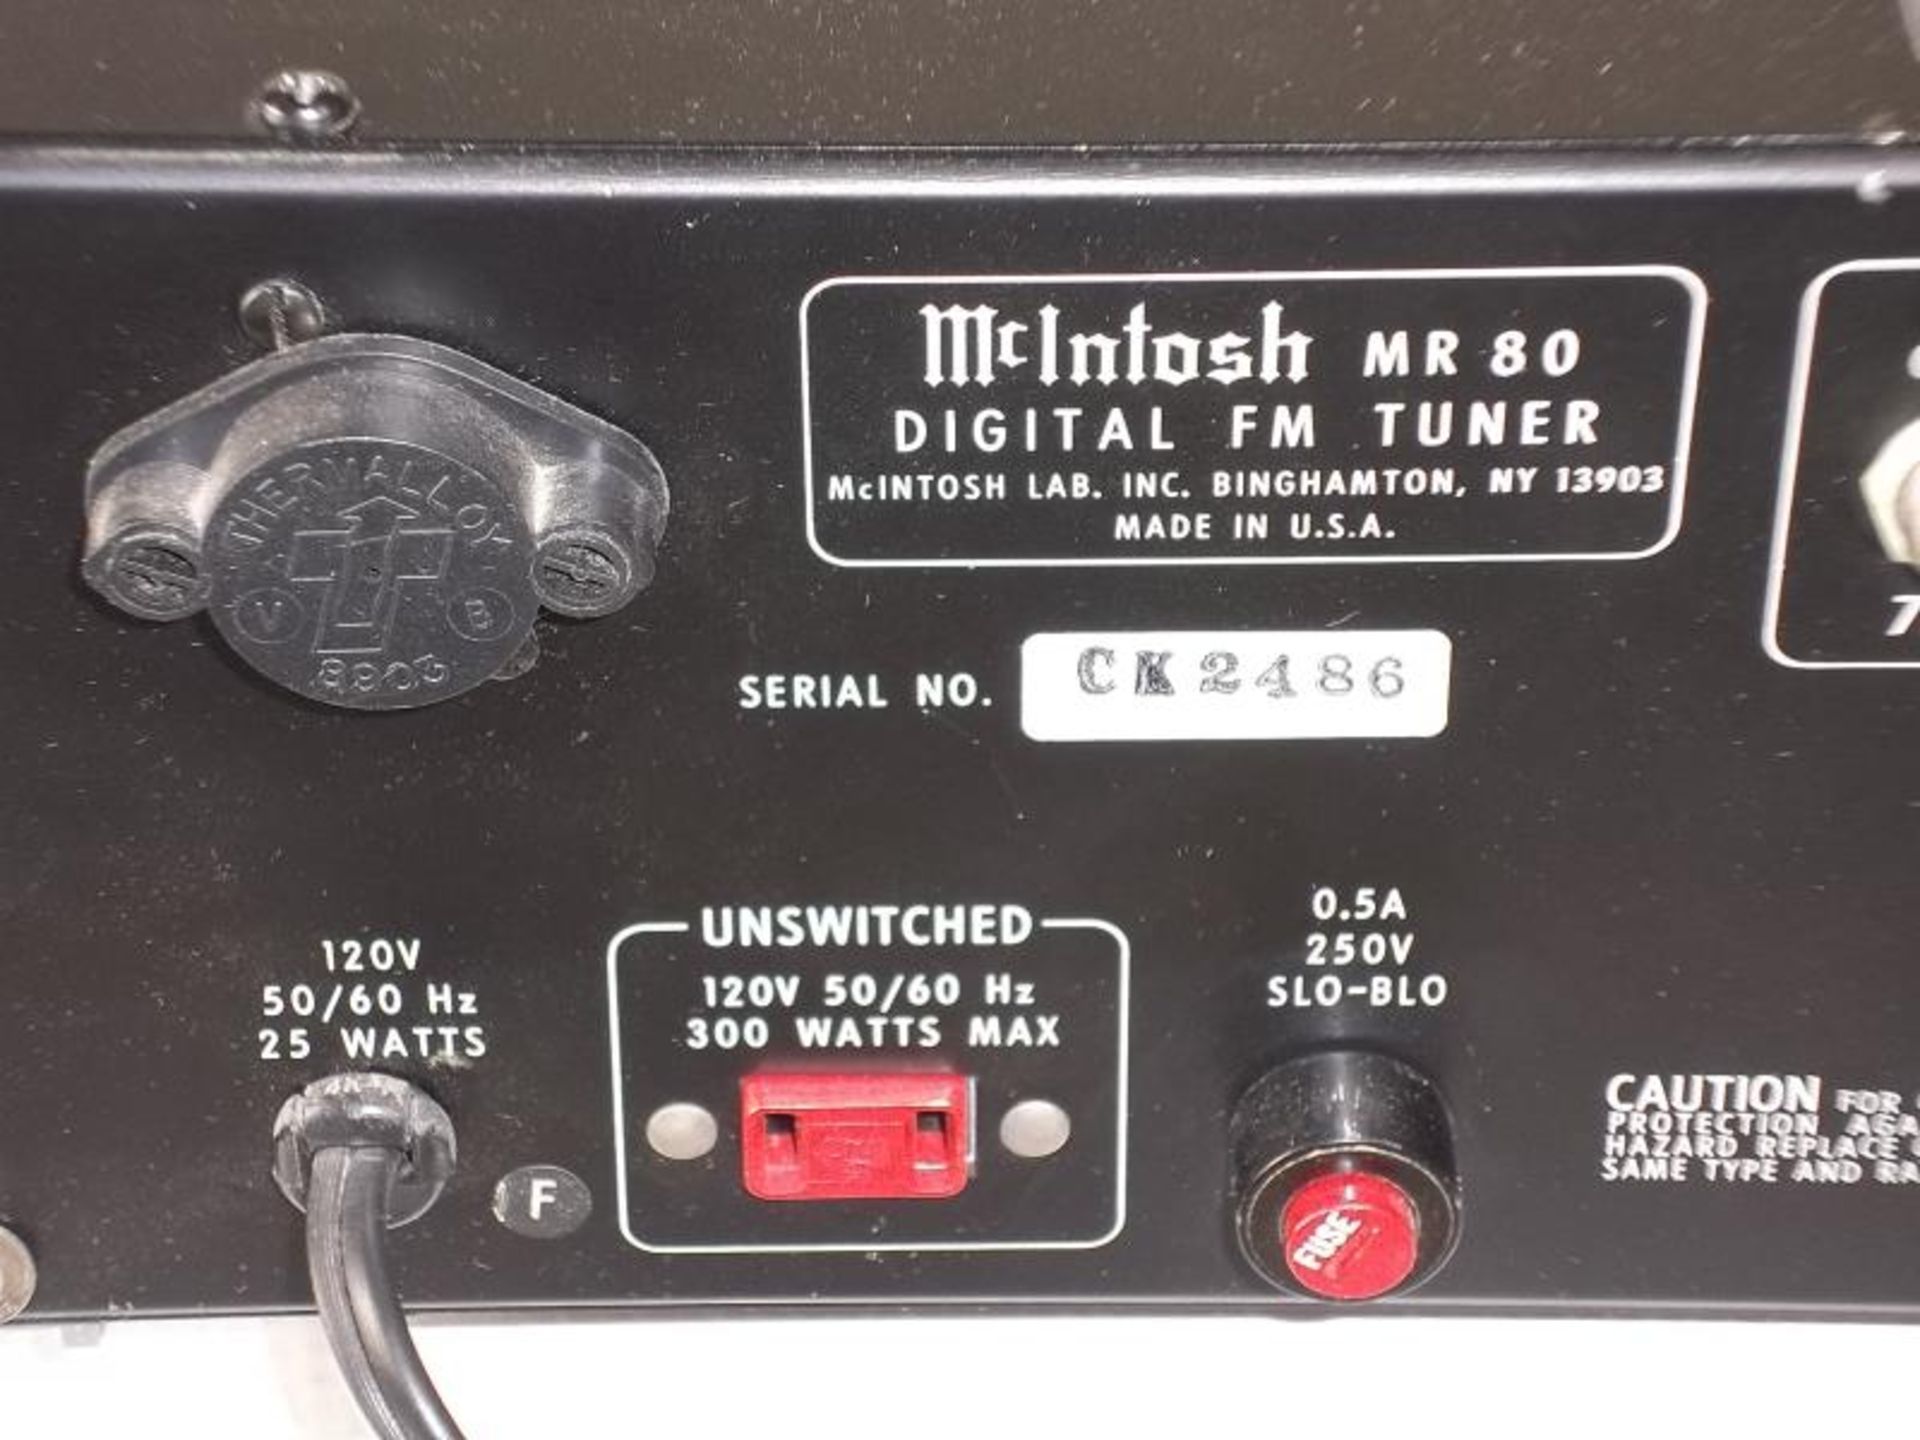 McIntosh MR 80, AM FM Tuner, in McIntosh cardboard box, with owner's manual, temp. instruction - Image 7 of 9